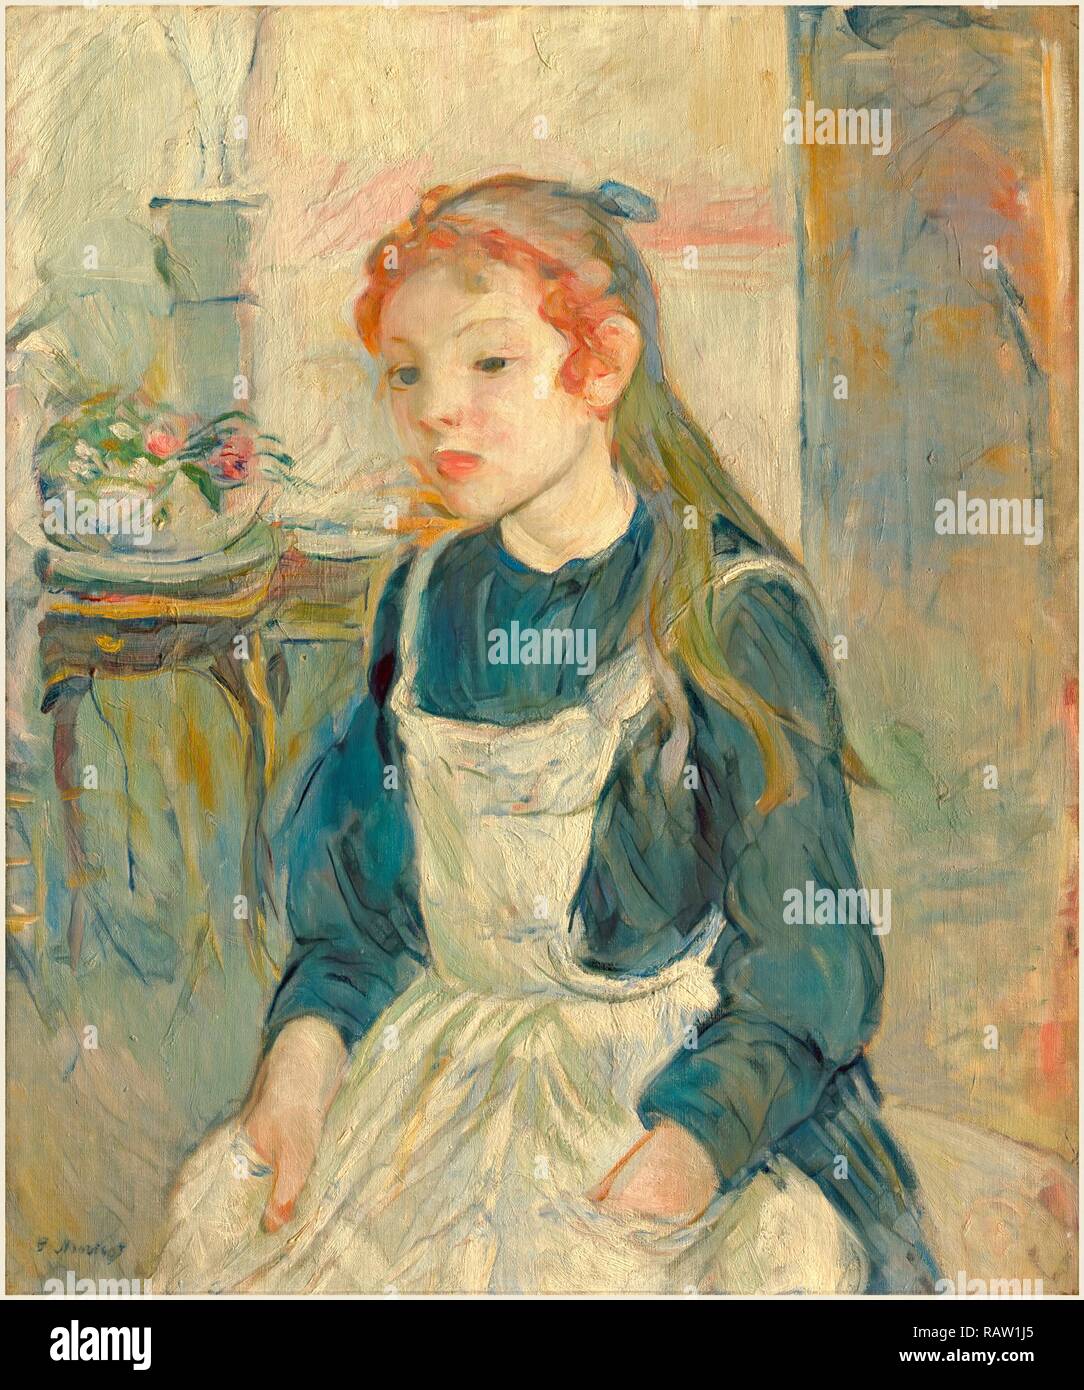 Berthe Morisot, French (1841-1895), Young Girl with an Apron, 1891, oil on canvas. Reimagined by Gibon. Classic art reimagined Stock Photo